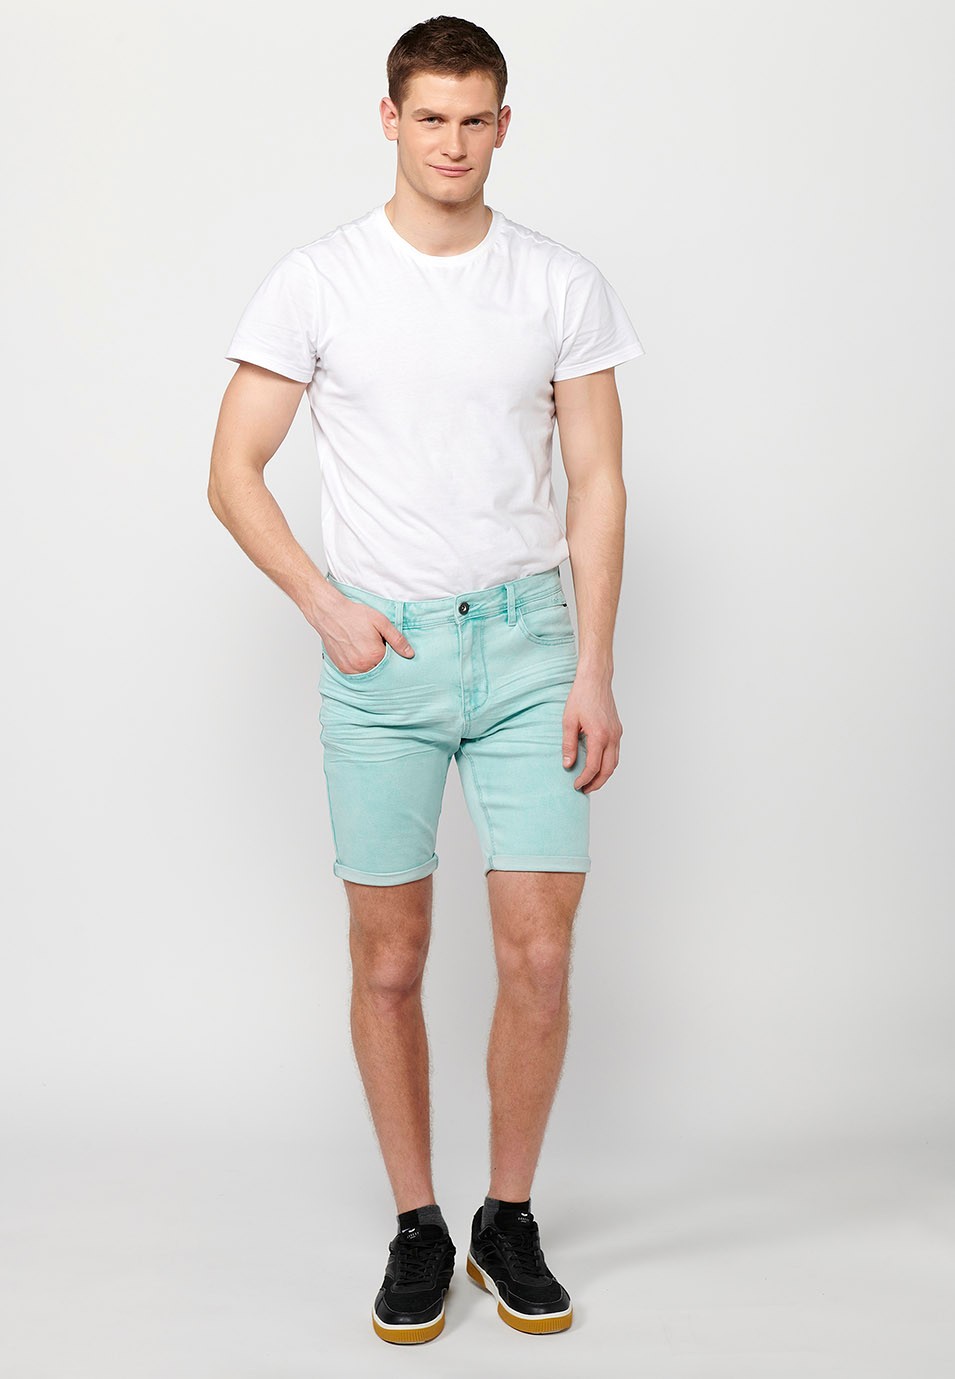 Shorts with turn-up closure with front zipper and button closure and five pockets, one blue pocket pocket for Men